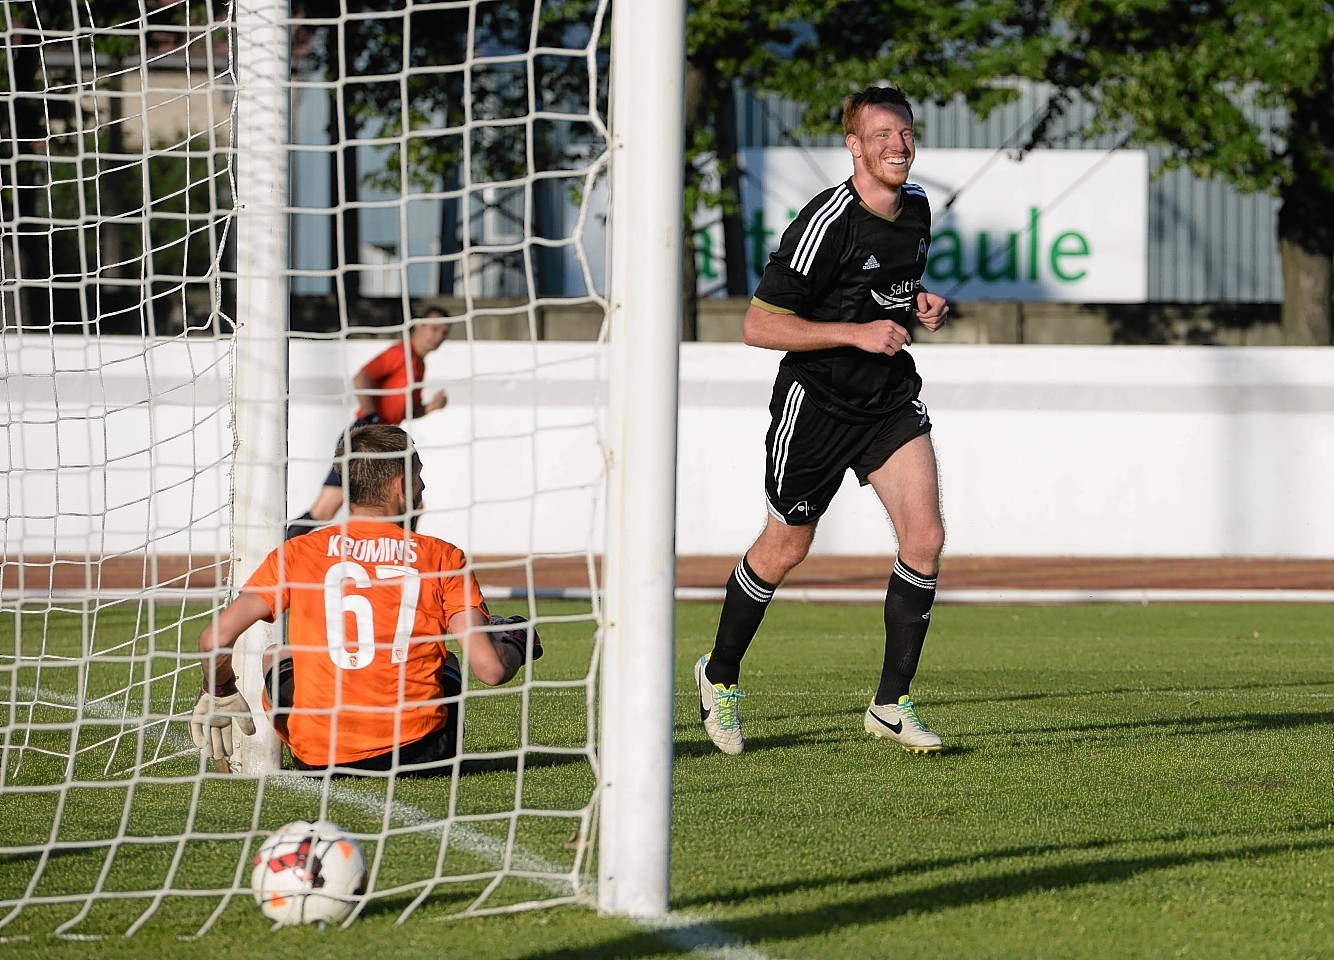 Rooney hit a hat-trick in Riga